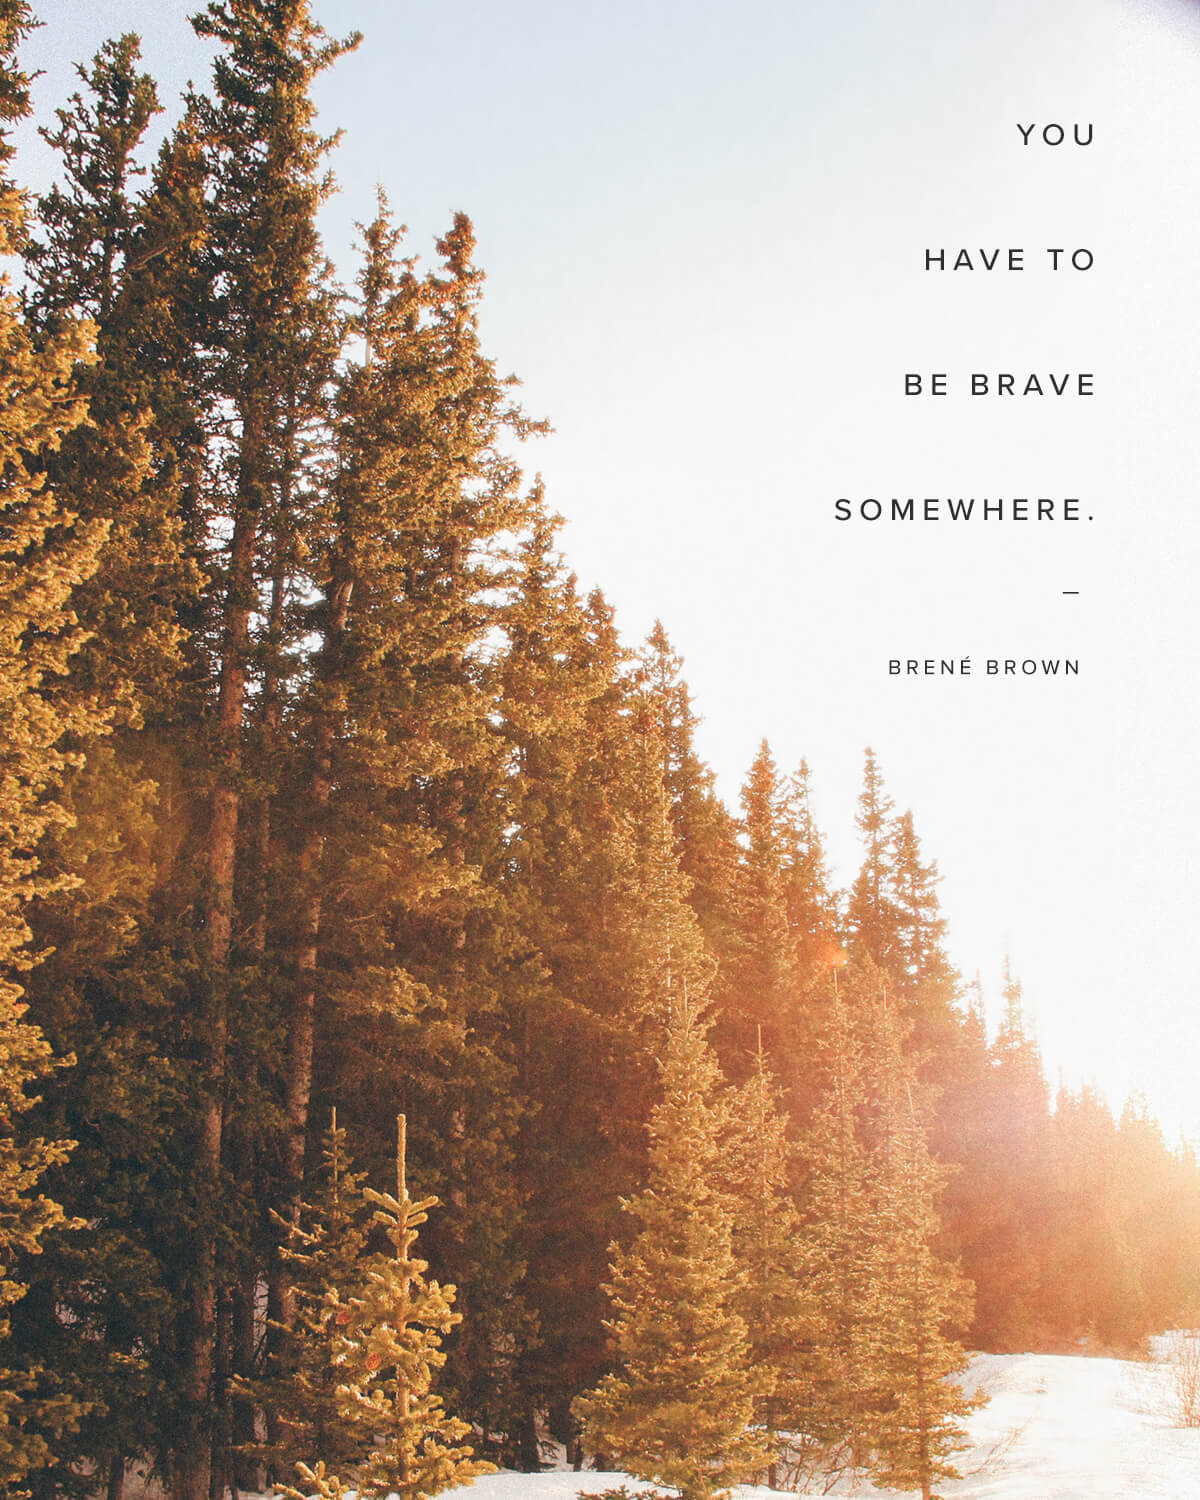 You have to be brave somewhere